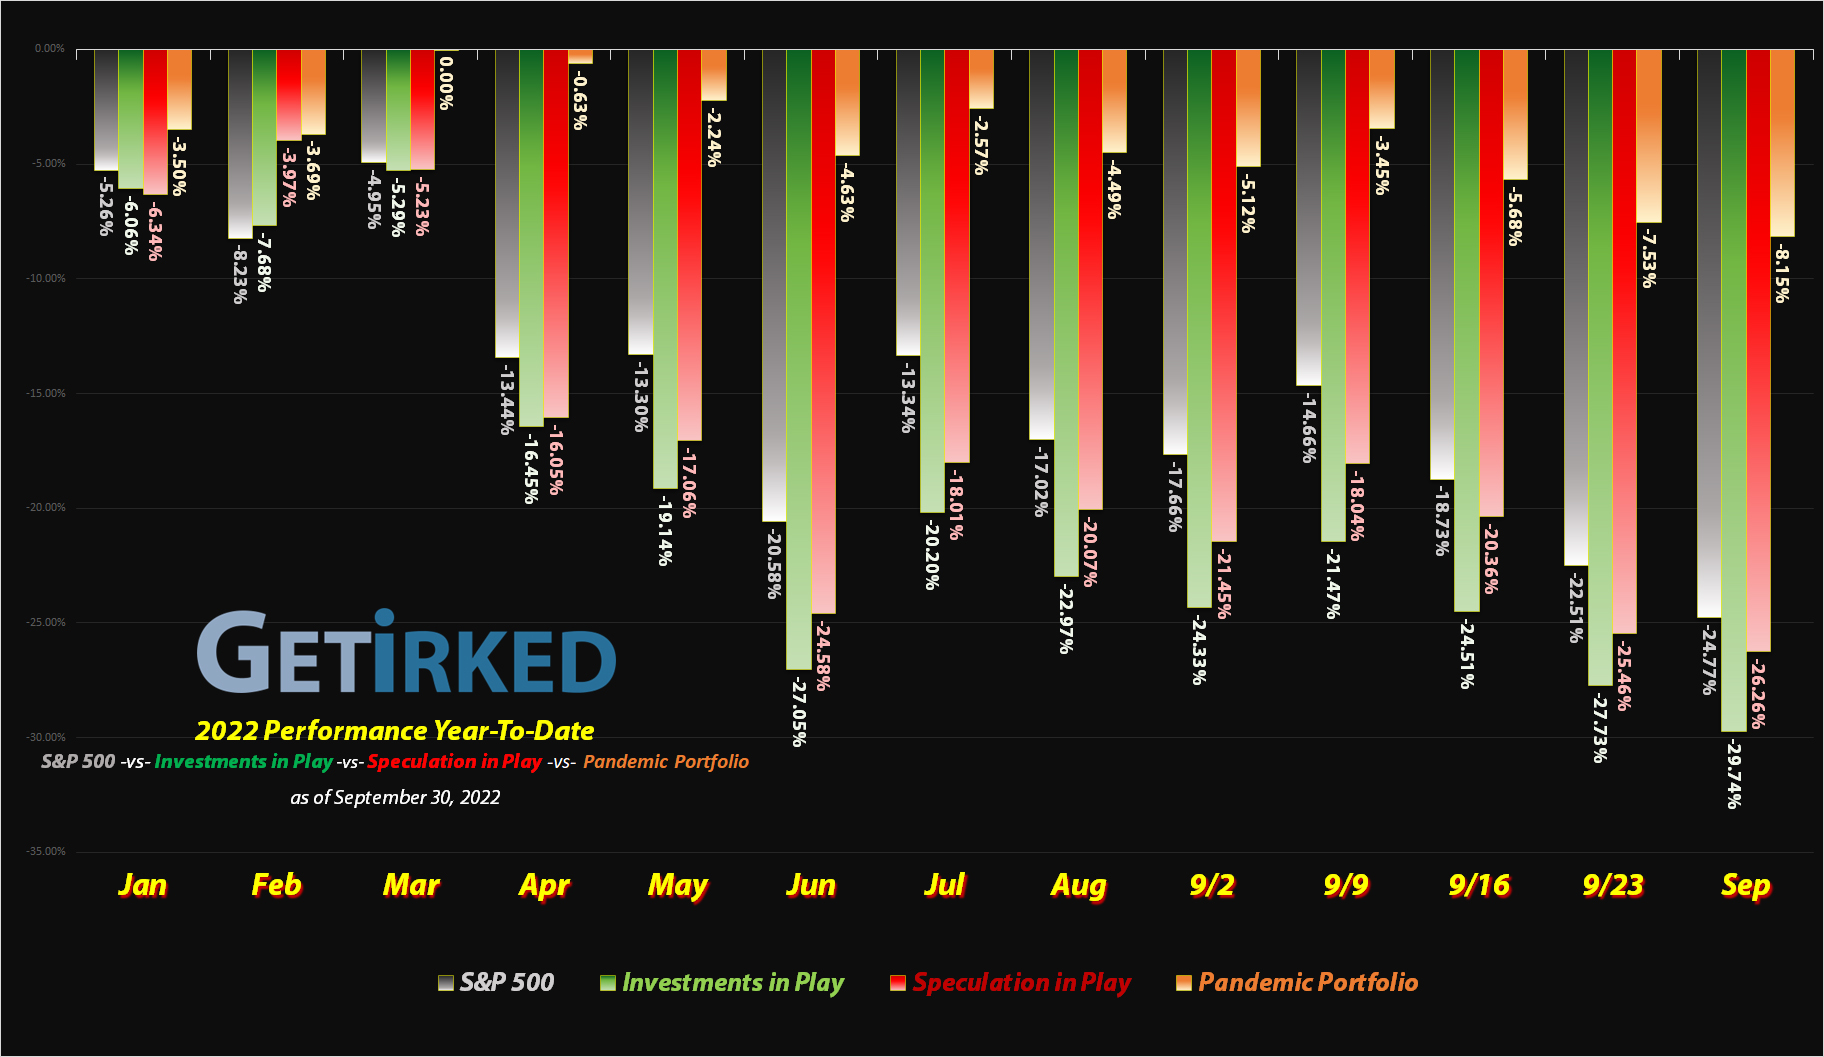 Get Irked - Year-to-Date Performance - Investments in Play vs. Speculation in Play - 2022 Year-to-Date Performance